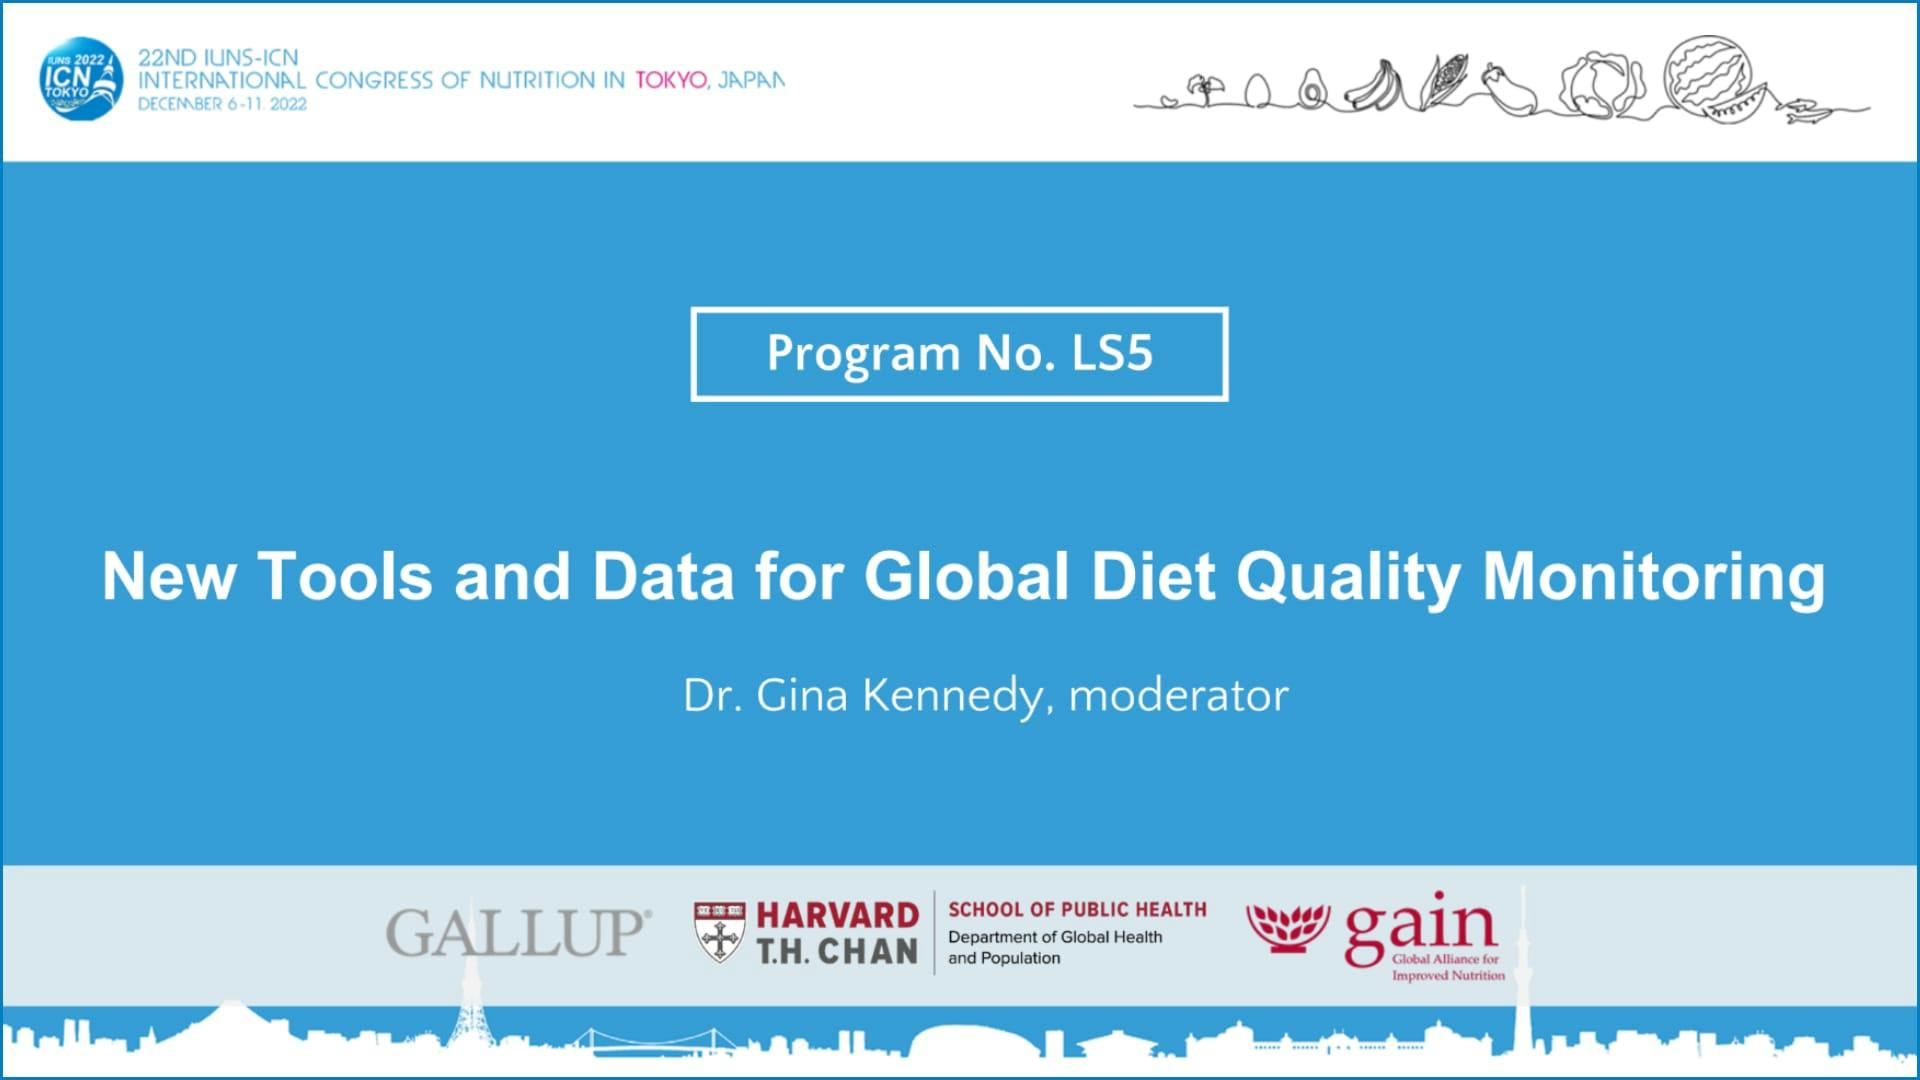 IUNS International Congress of Nutrition Symposium: New tools and data for global diet quality monitoring